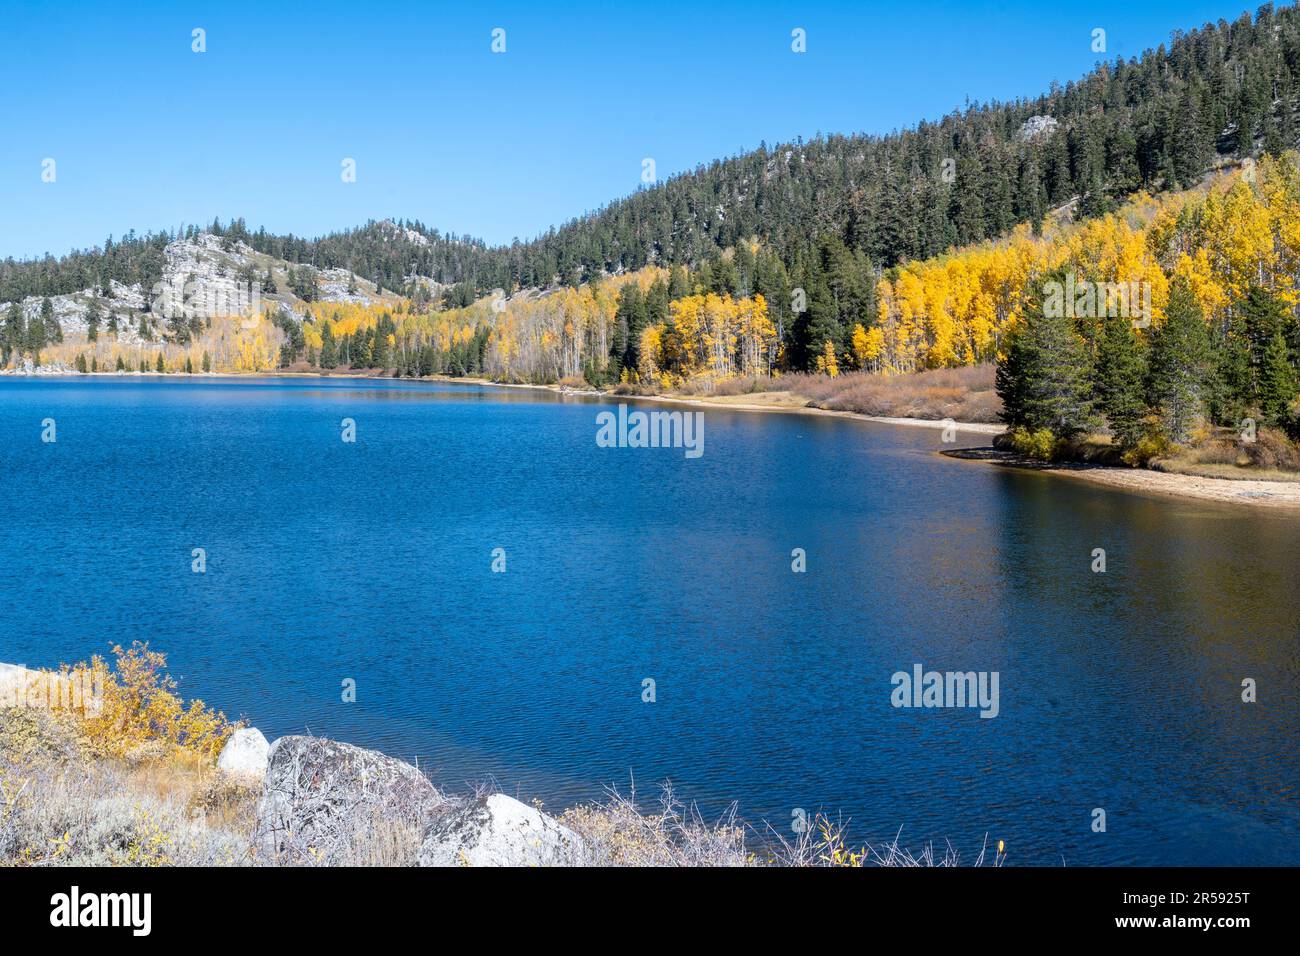 Shore of very blue Marlette Lake from the trail that starts at the Spooner lake, a popular Autumn hiking destination in the Sierra Nevada of Californi Stock Photo